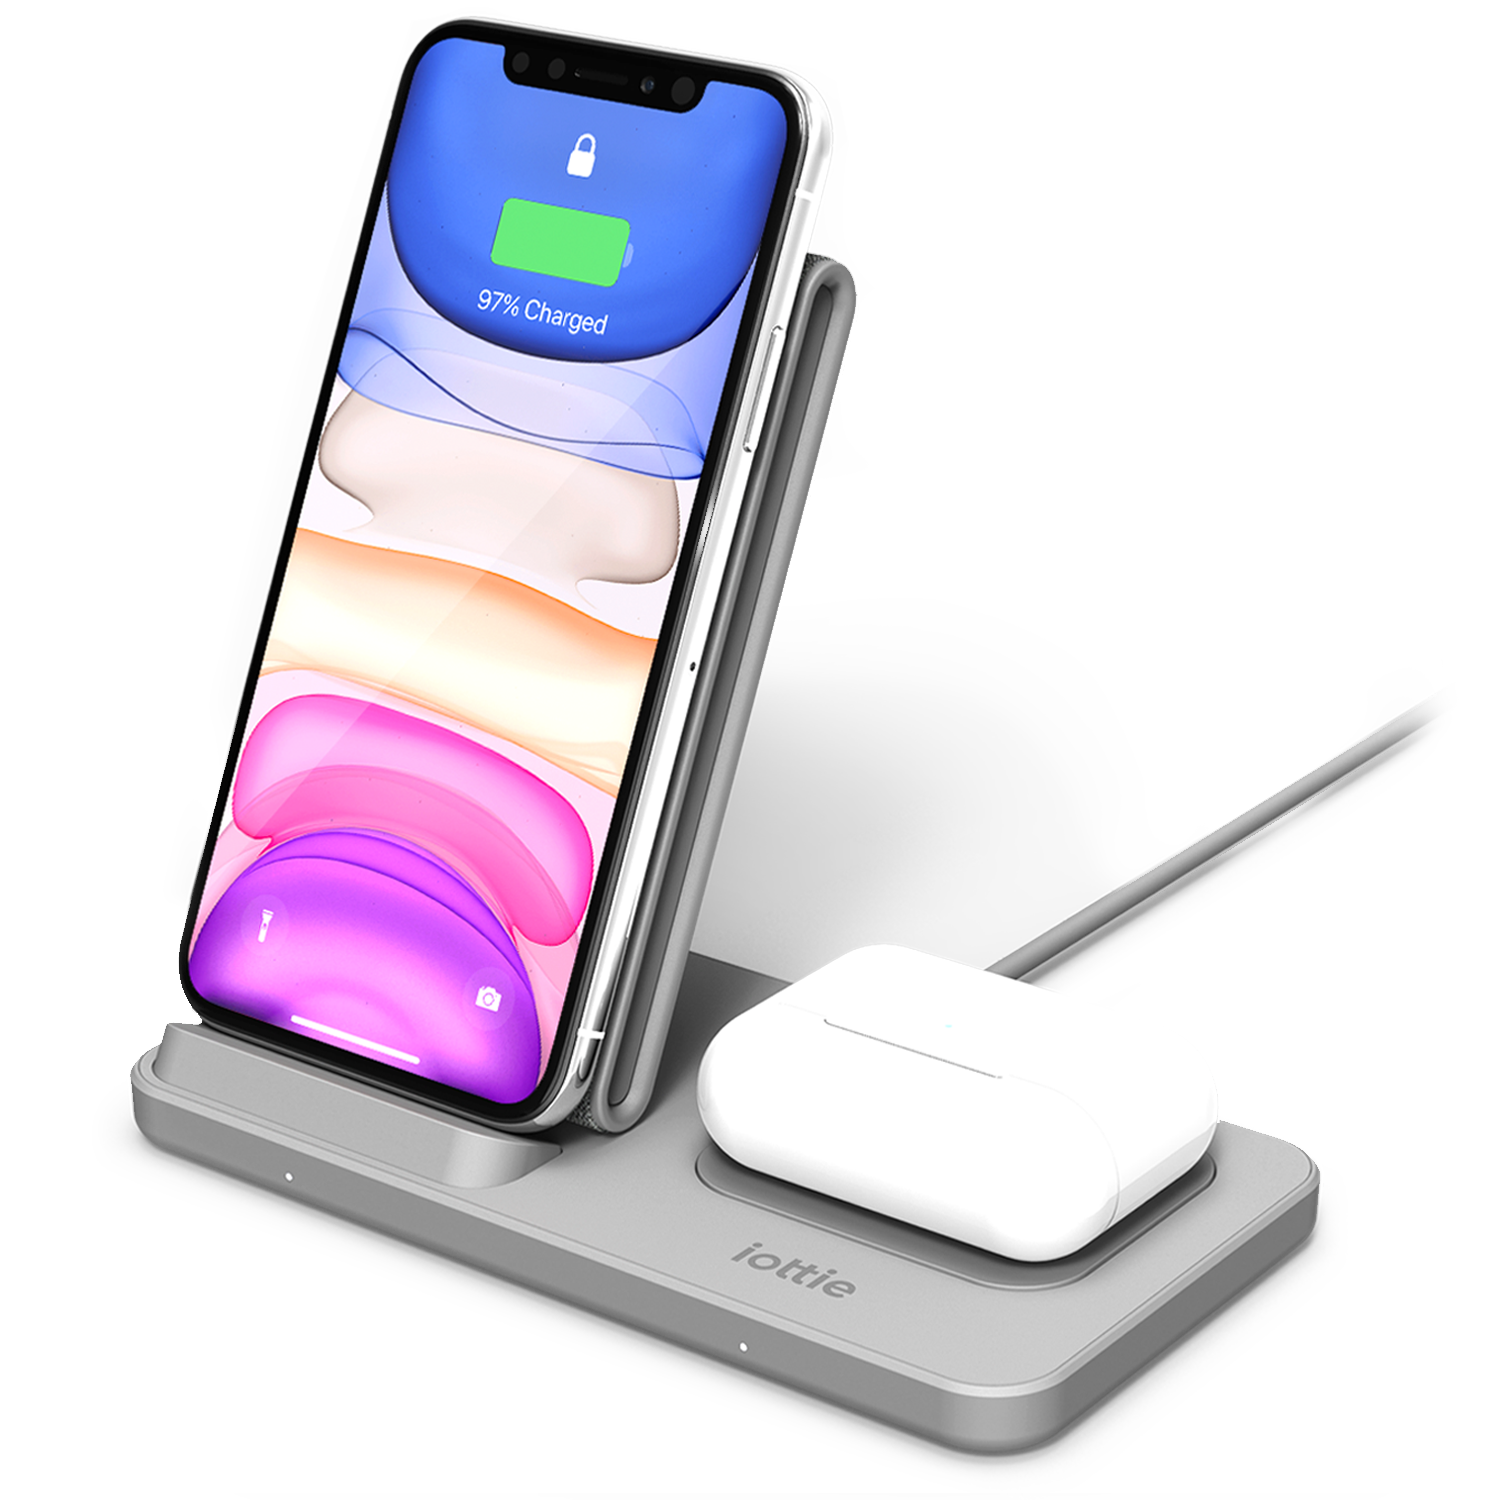 iPhone & AirPods Wirelessly Charging on the iOttie iON Wireless Duo 10W Stand and 10W Pad, qi-certified charger compatible